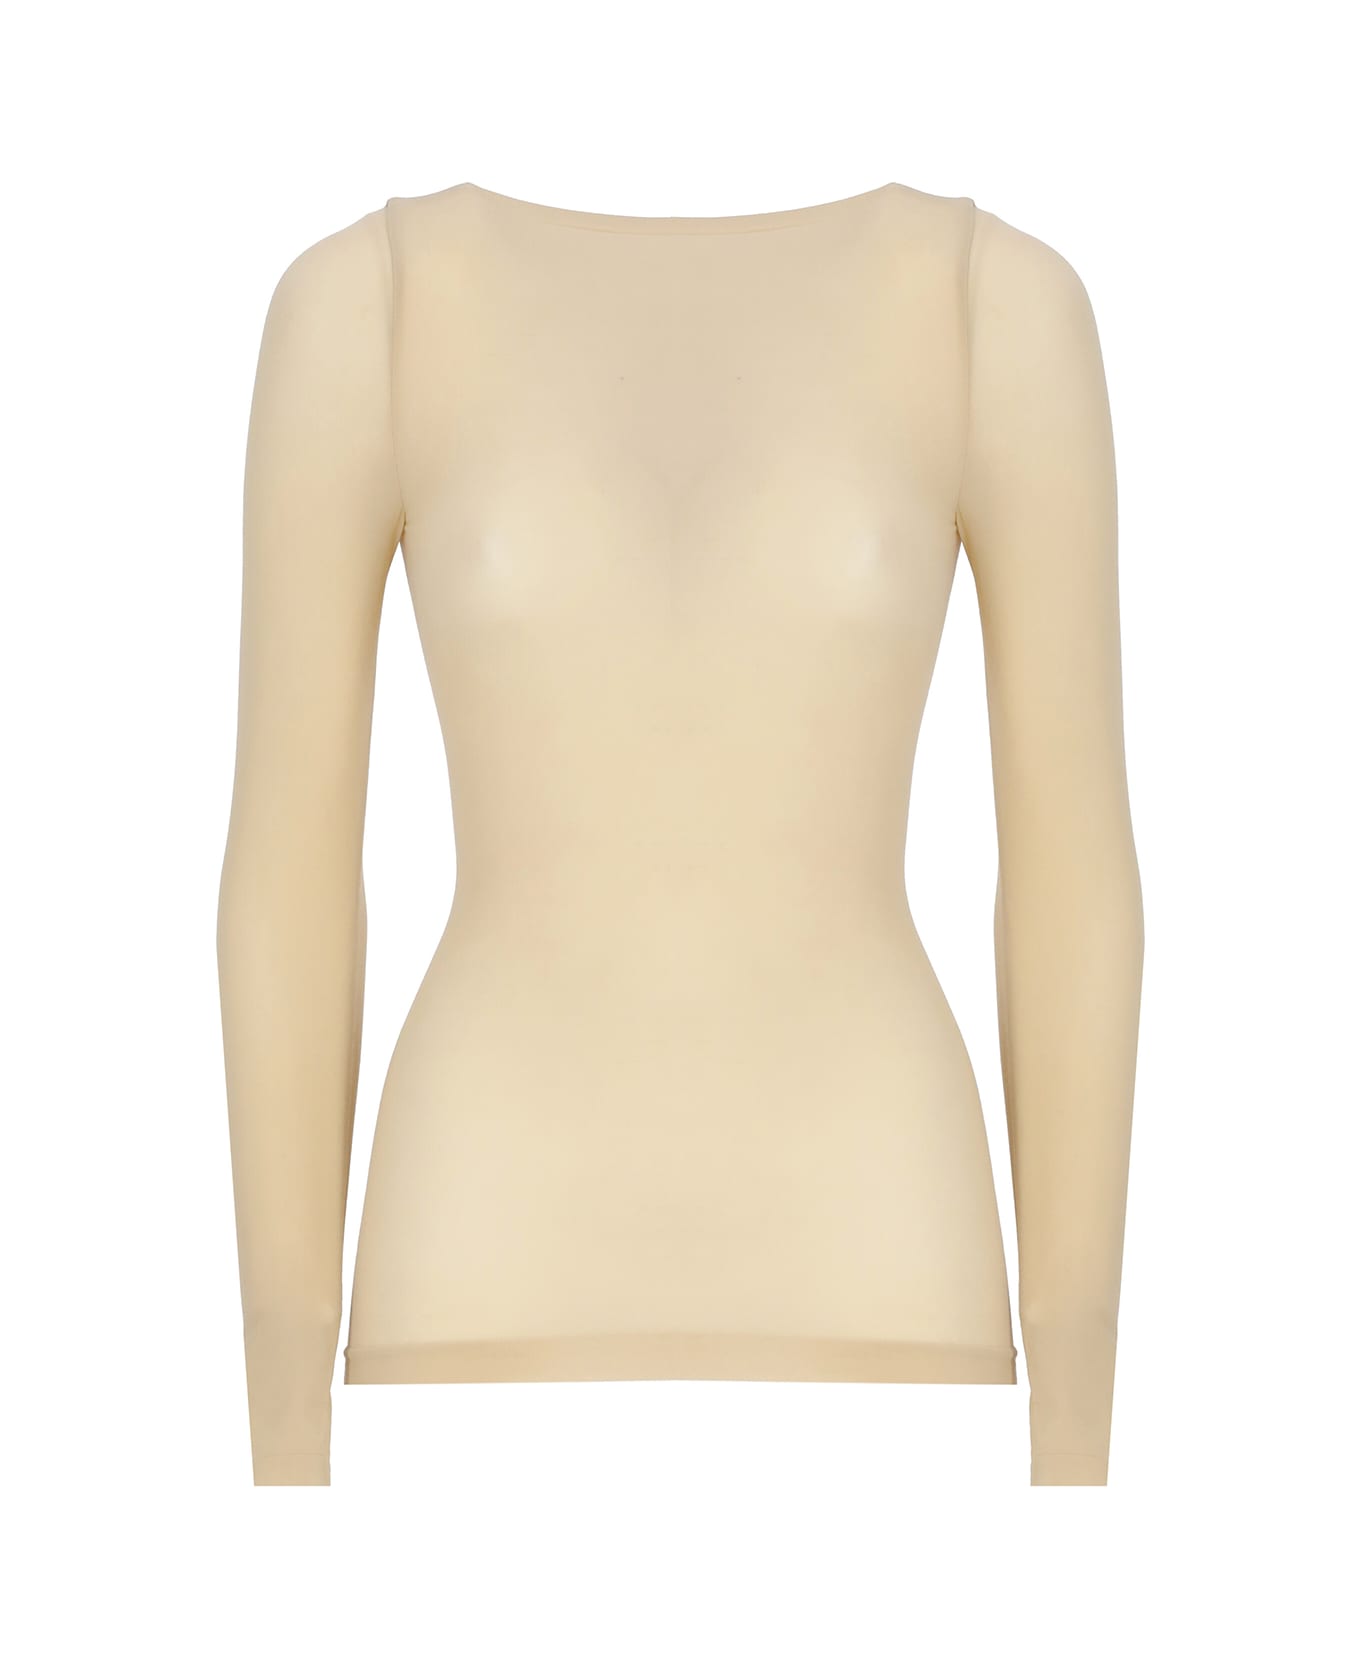 Wolford Buenos Aires T-shirt - Beige